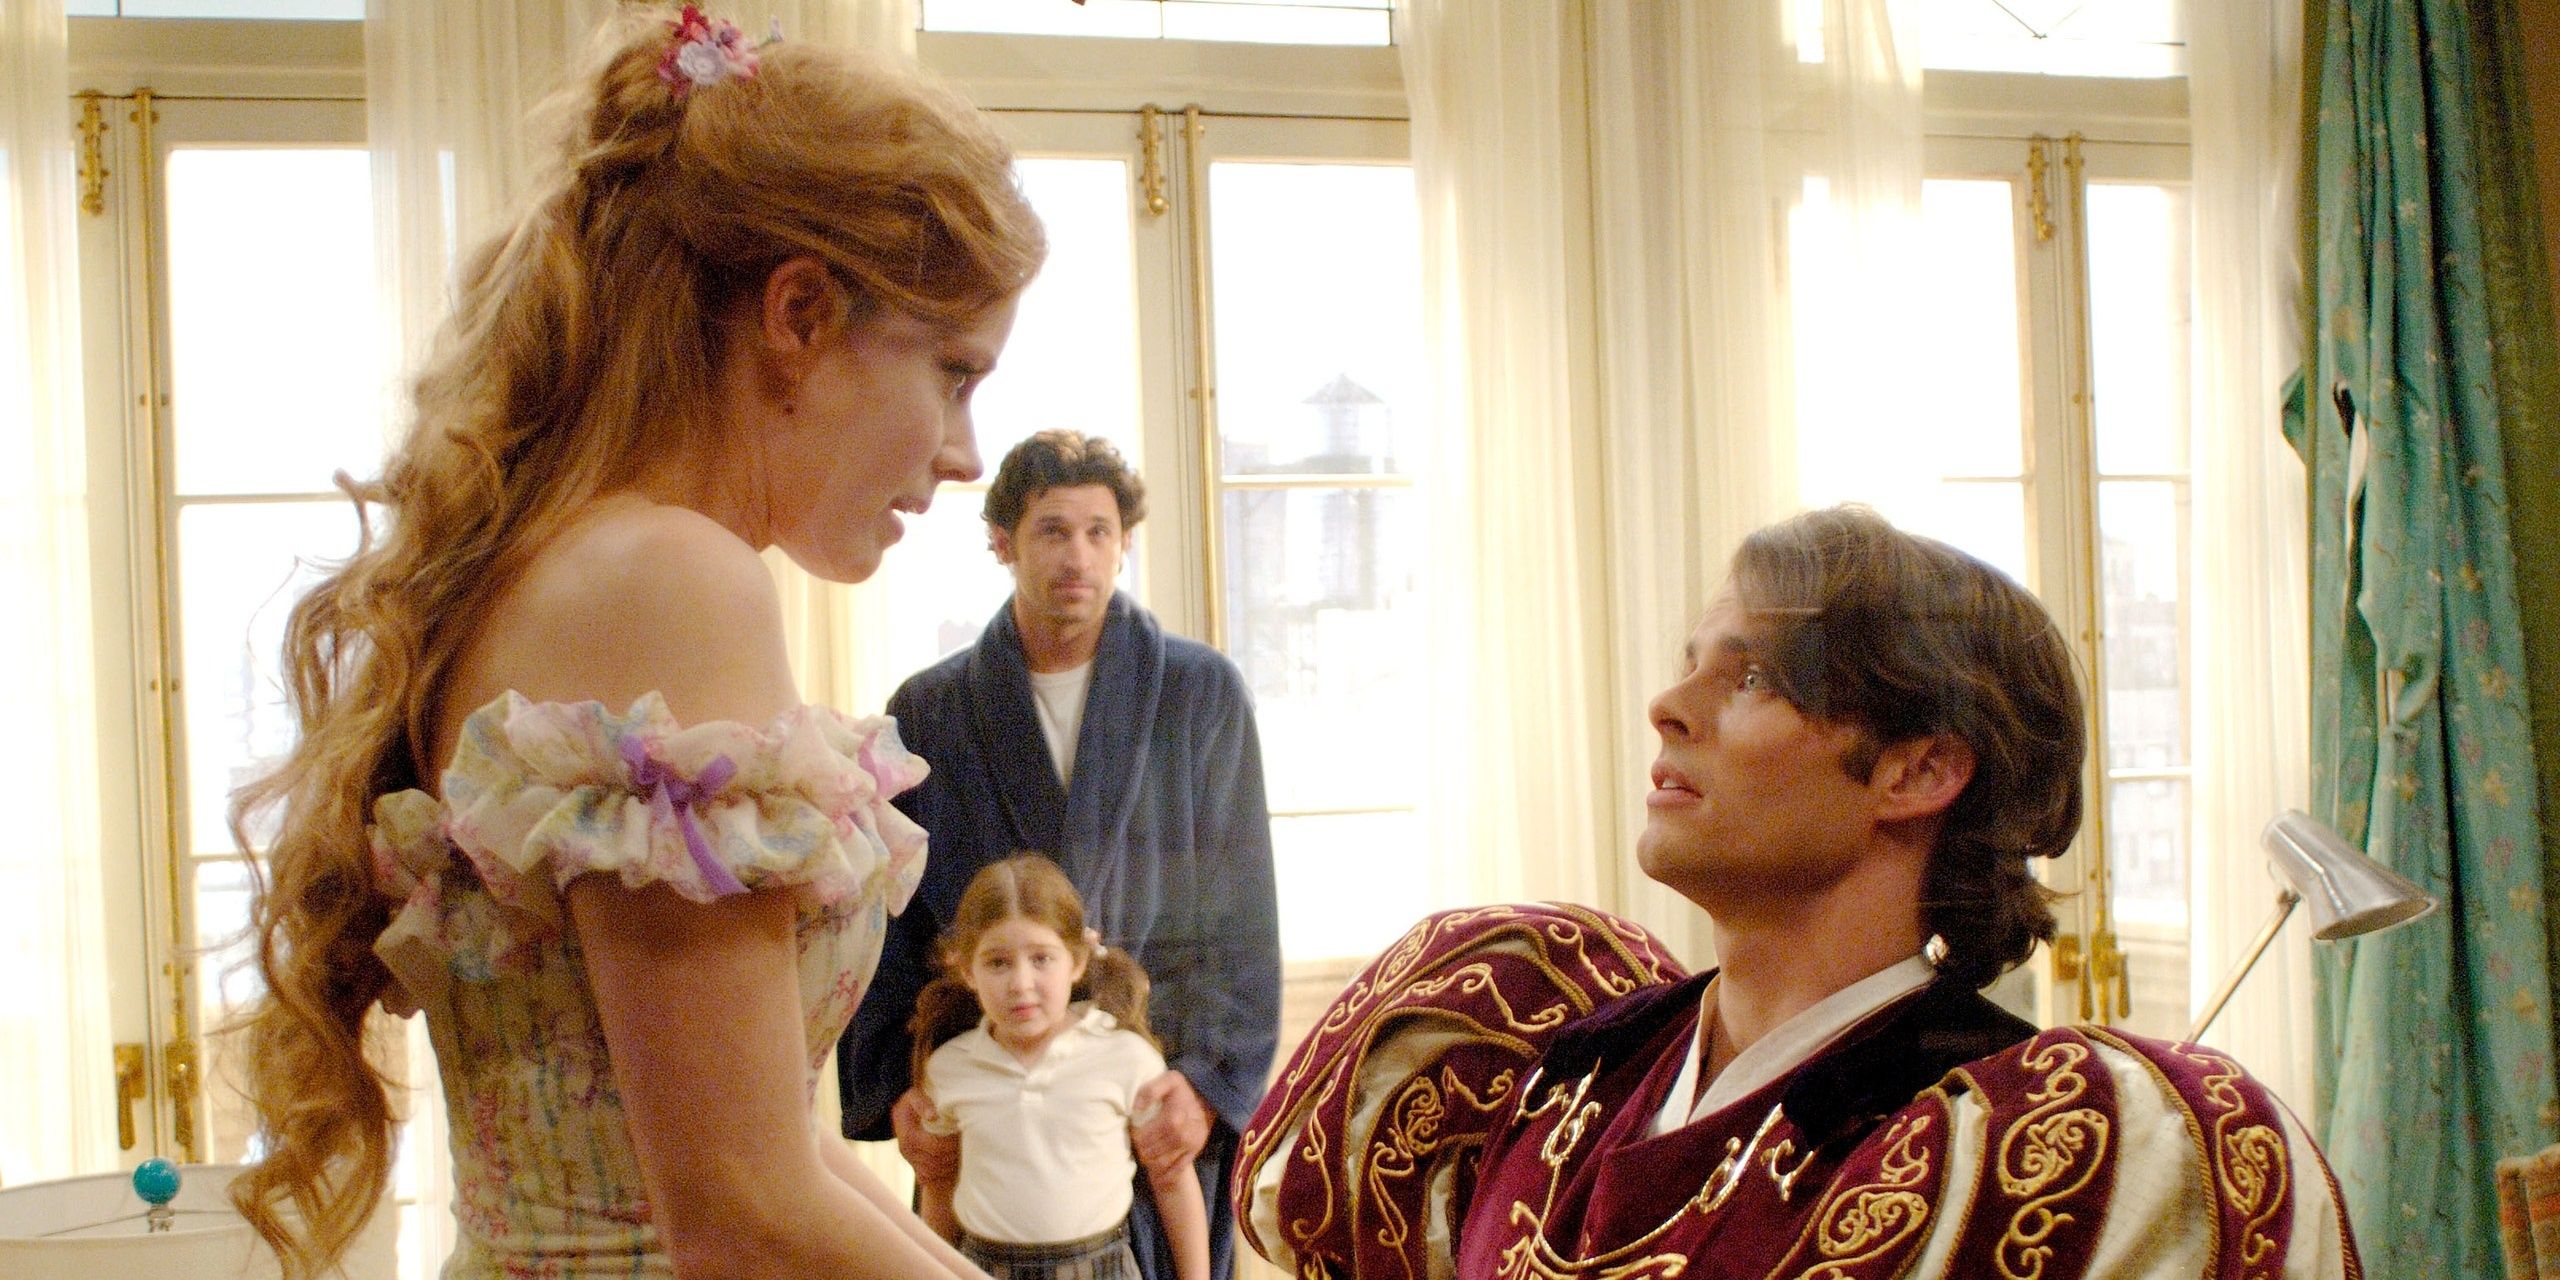 Giselle (Amy Adams) speaks to Prince Edward while Robert (Patrick Dempsey) looks on in confusion